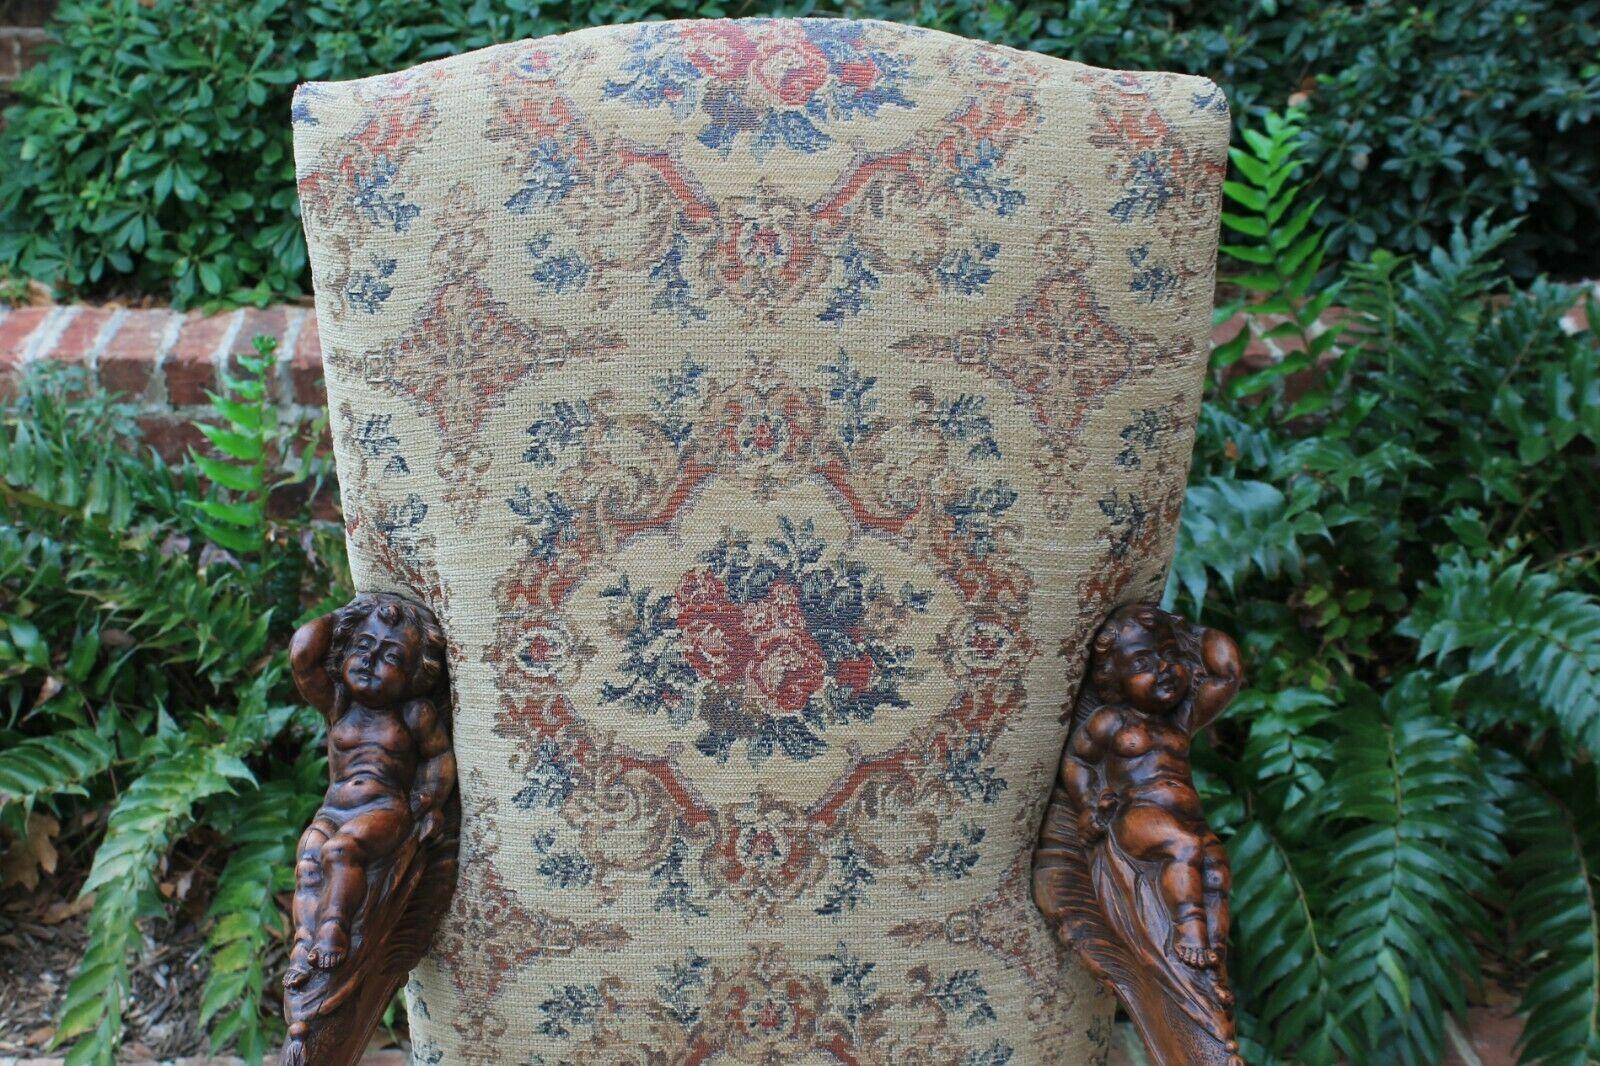 Upholstery Antique Italian Besarel Walnut Arm Chair Baroque Upholstered Mid-19th C Rare For Sale